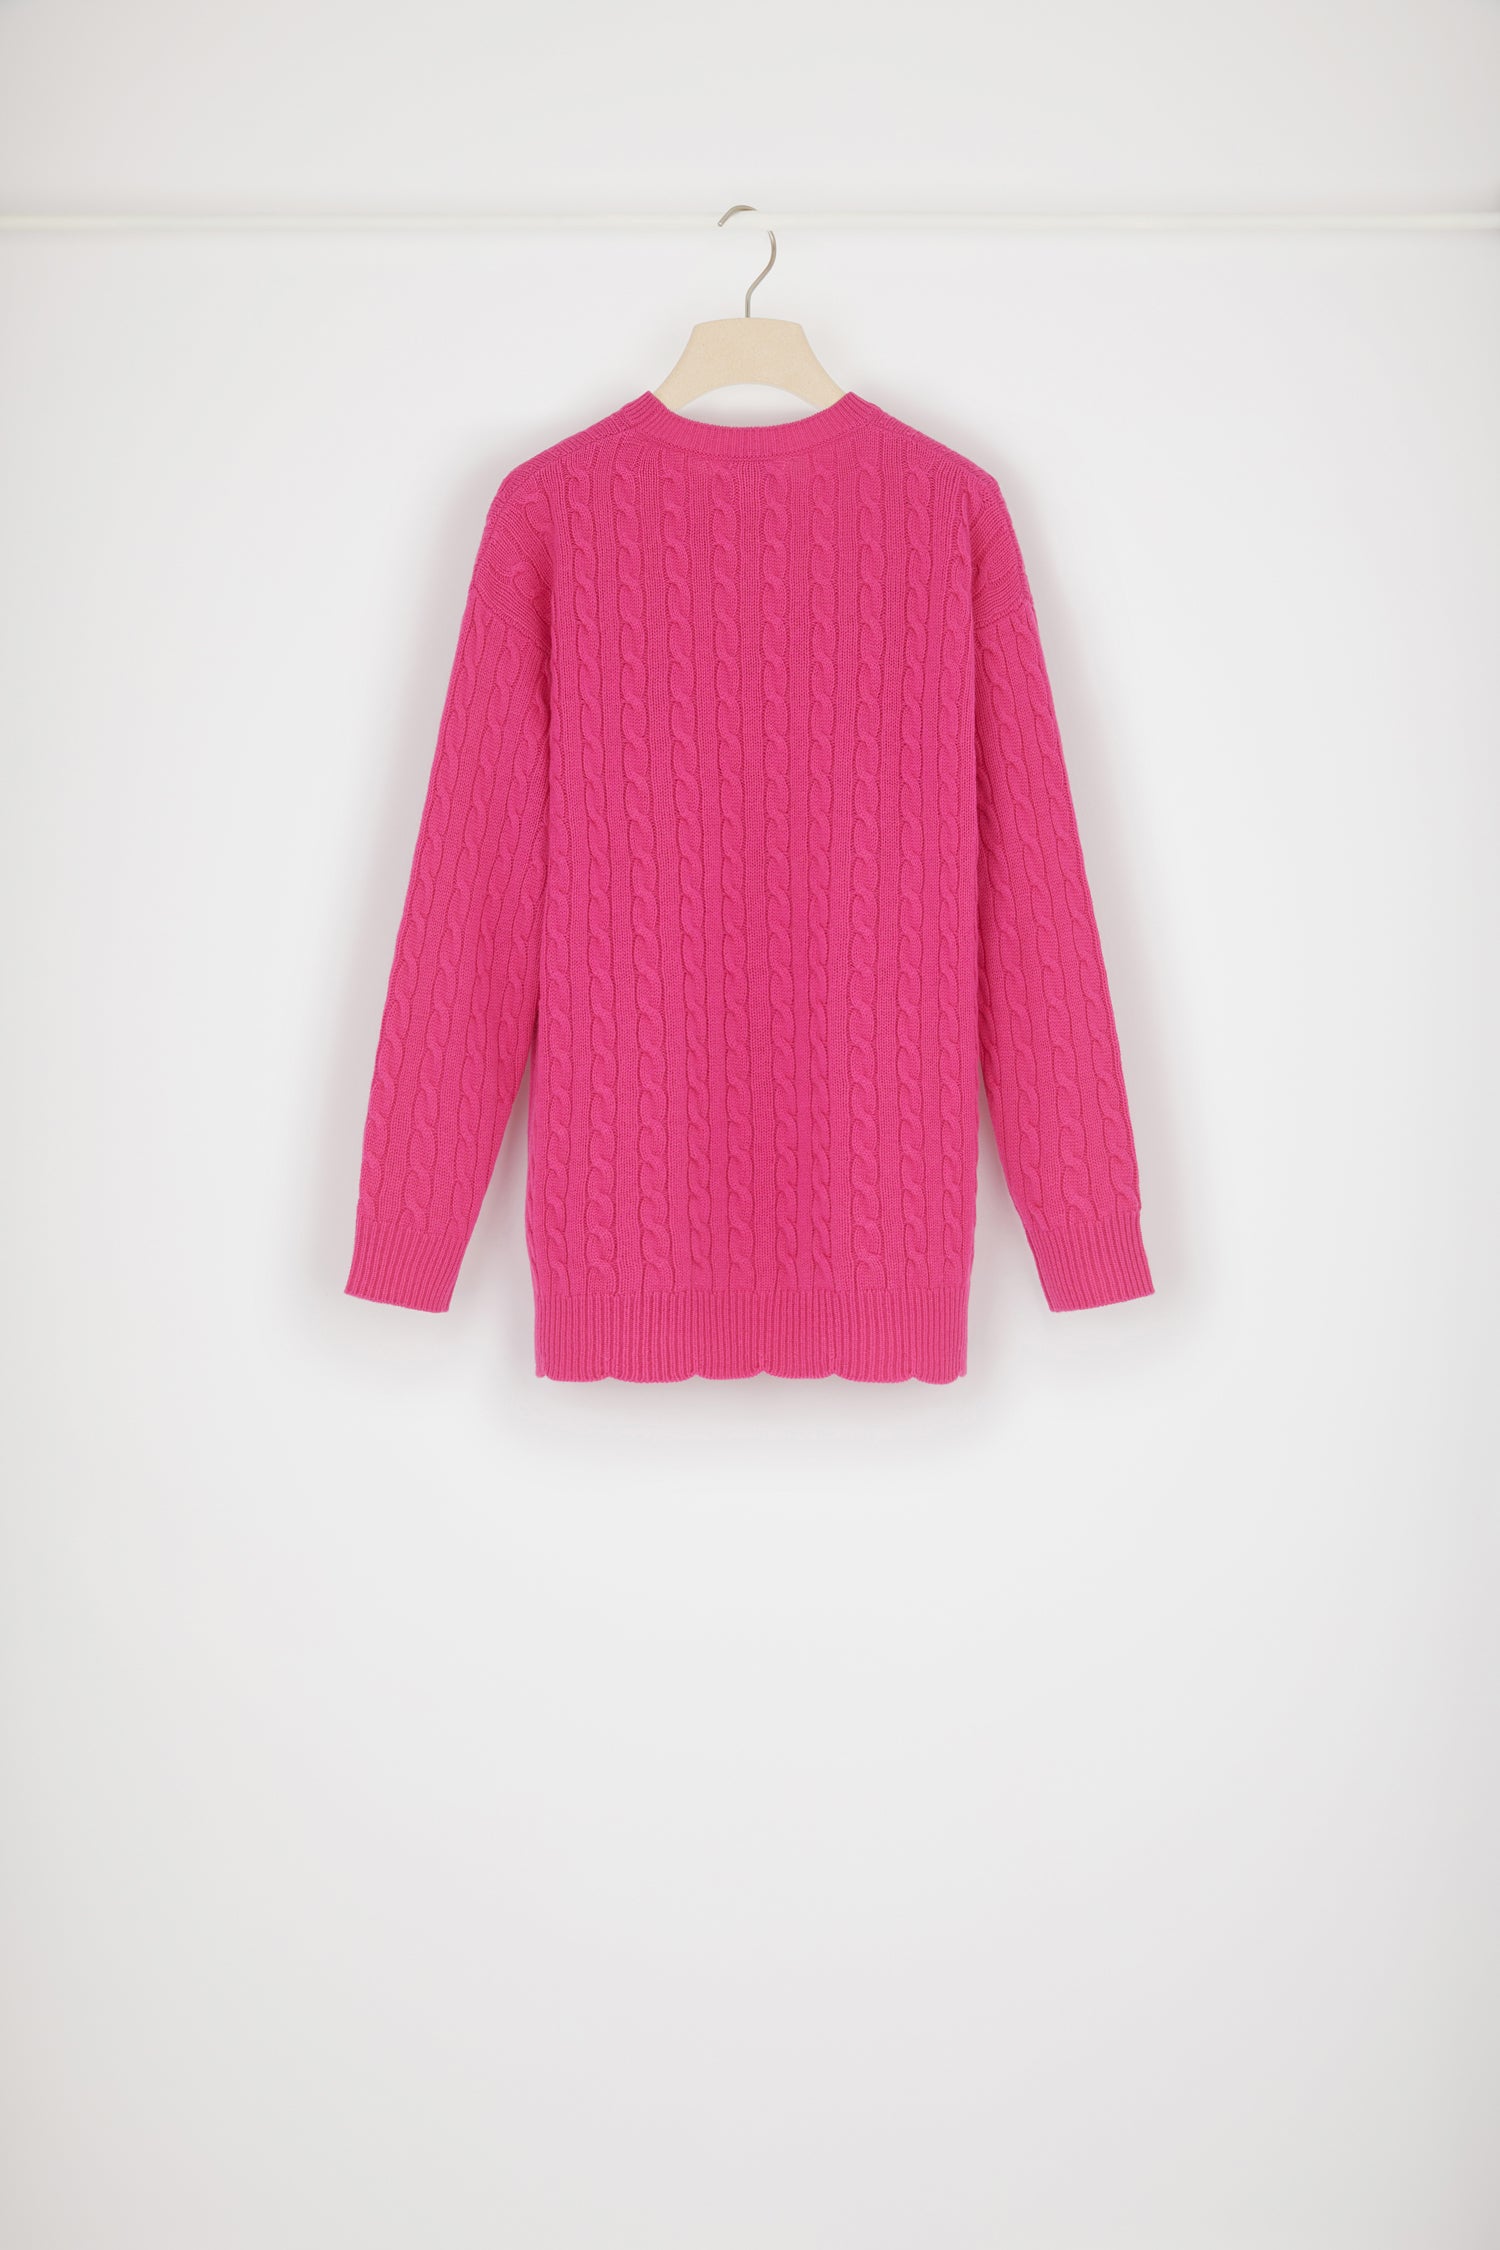 Patou | JP cable knit jumper in Merino wool